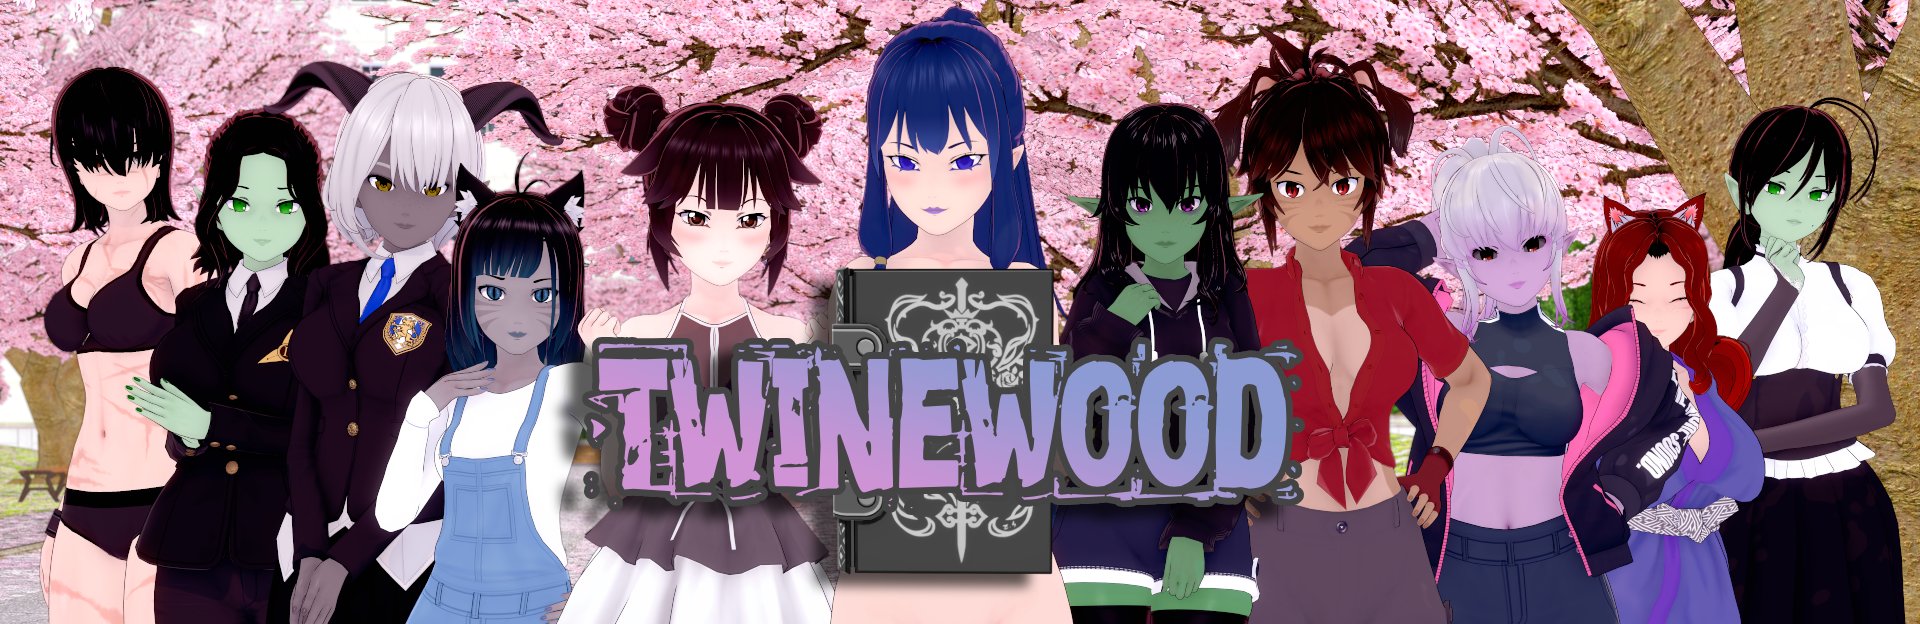 Twinewood1.png